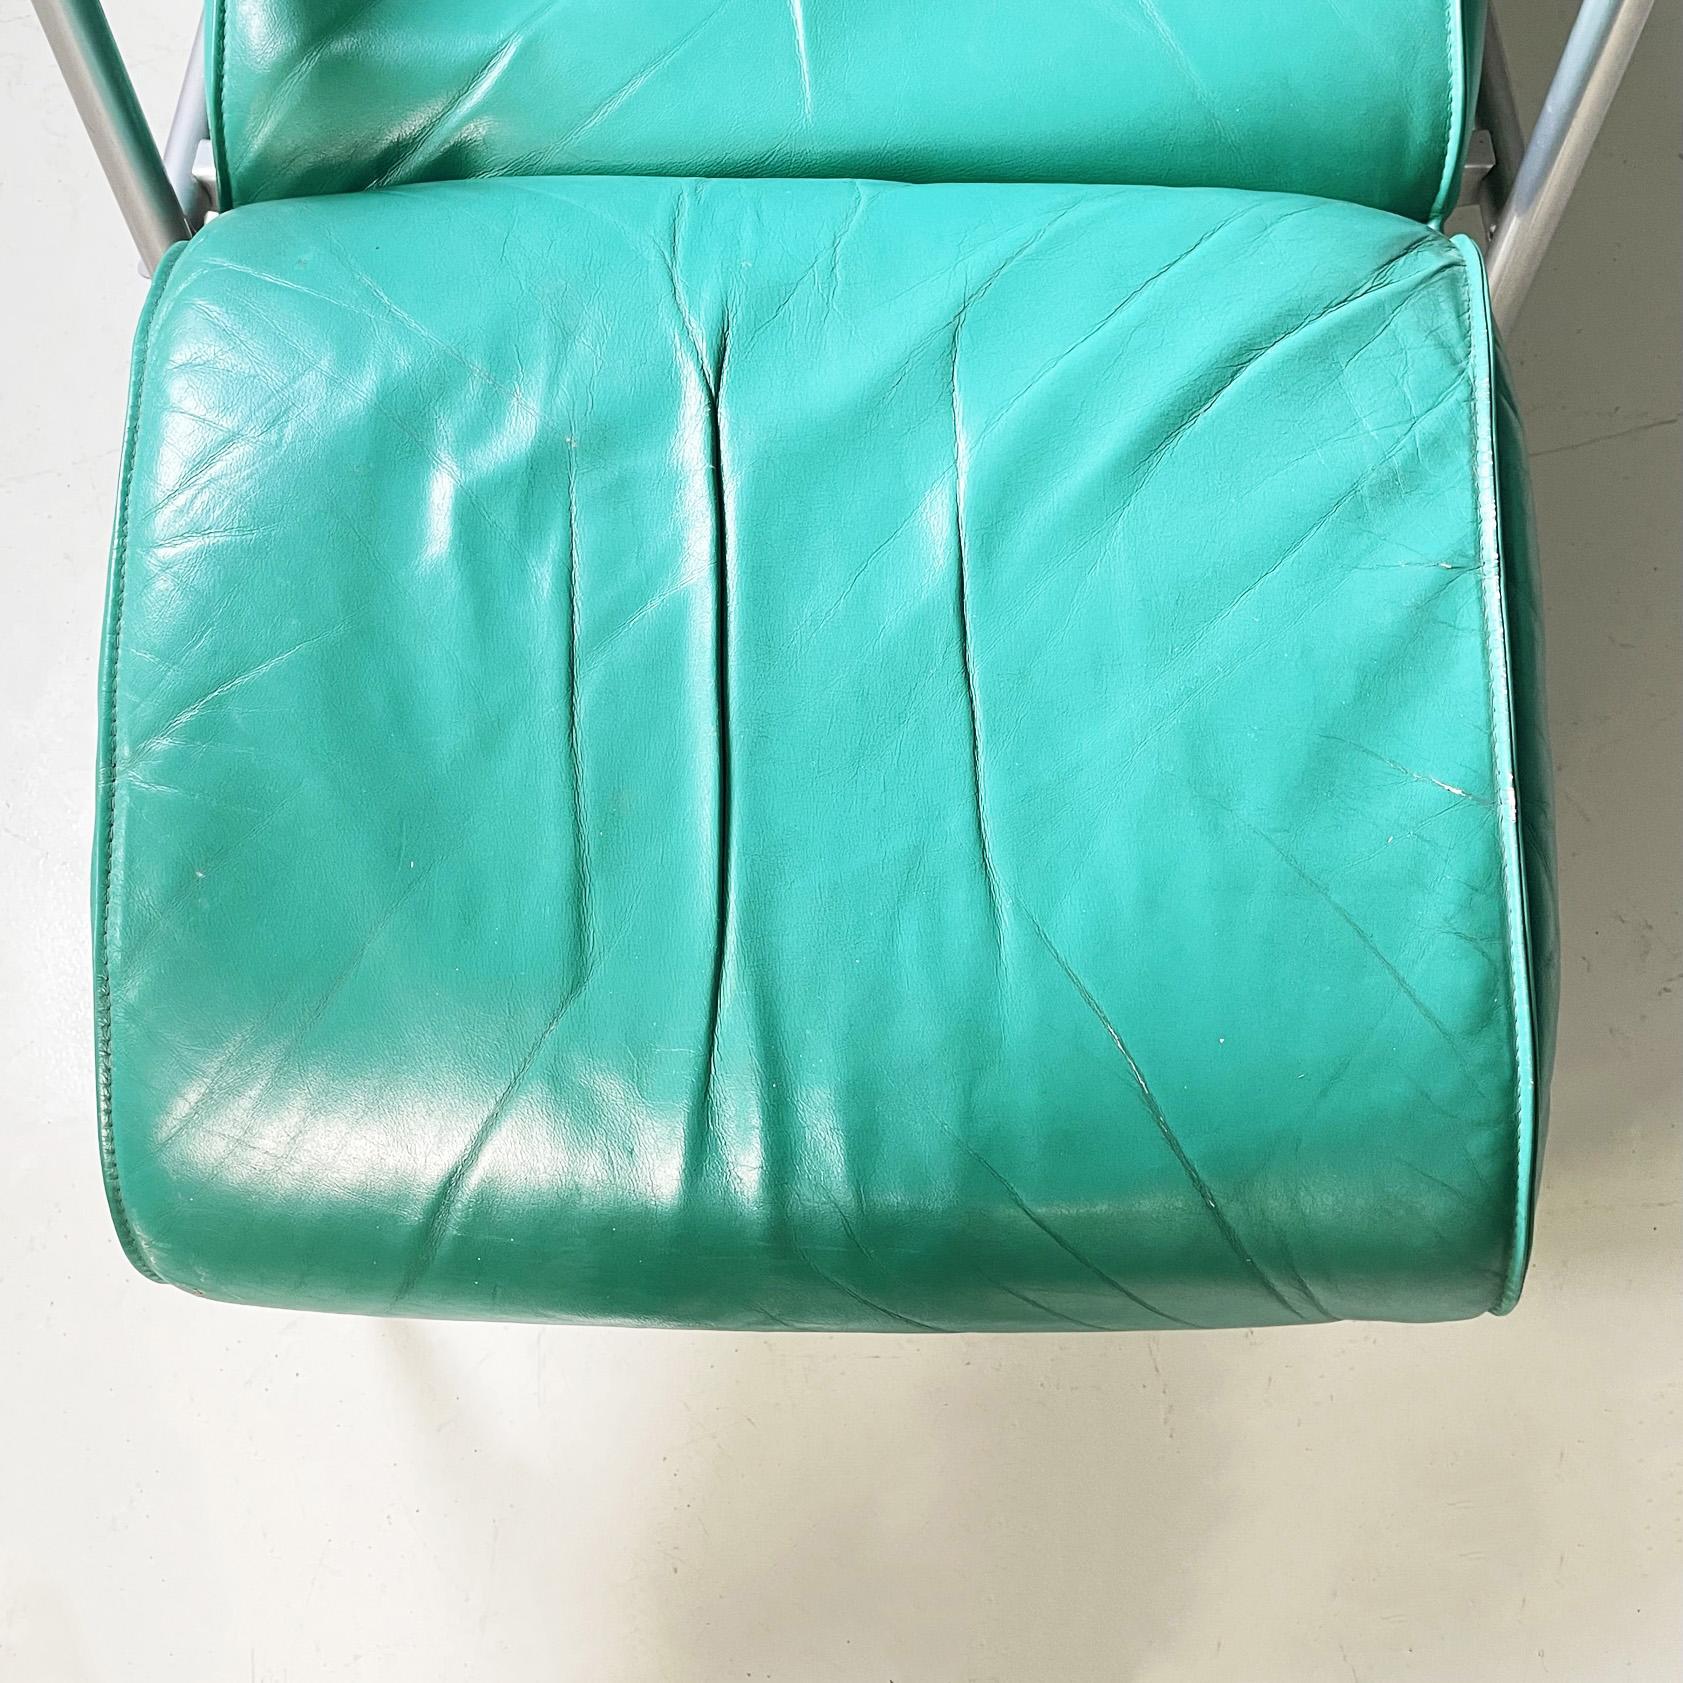 Italian Modern Armchair in Aqua-Green Leather, Wood and Metal, 1980s For Sale 5